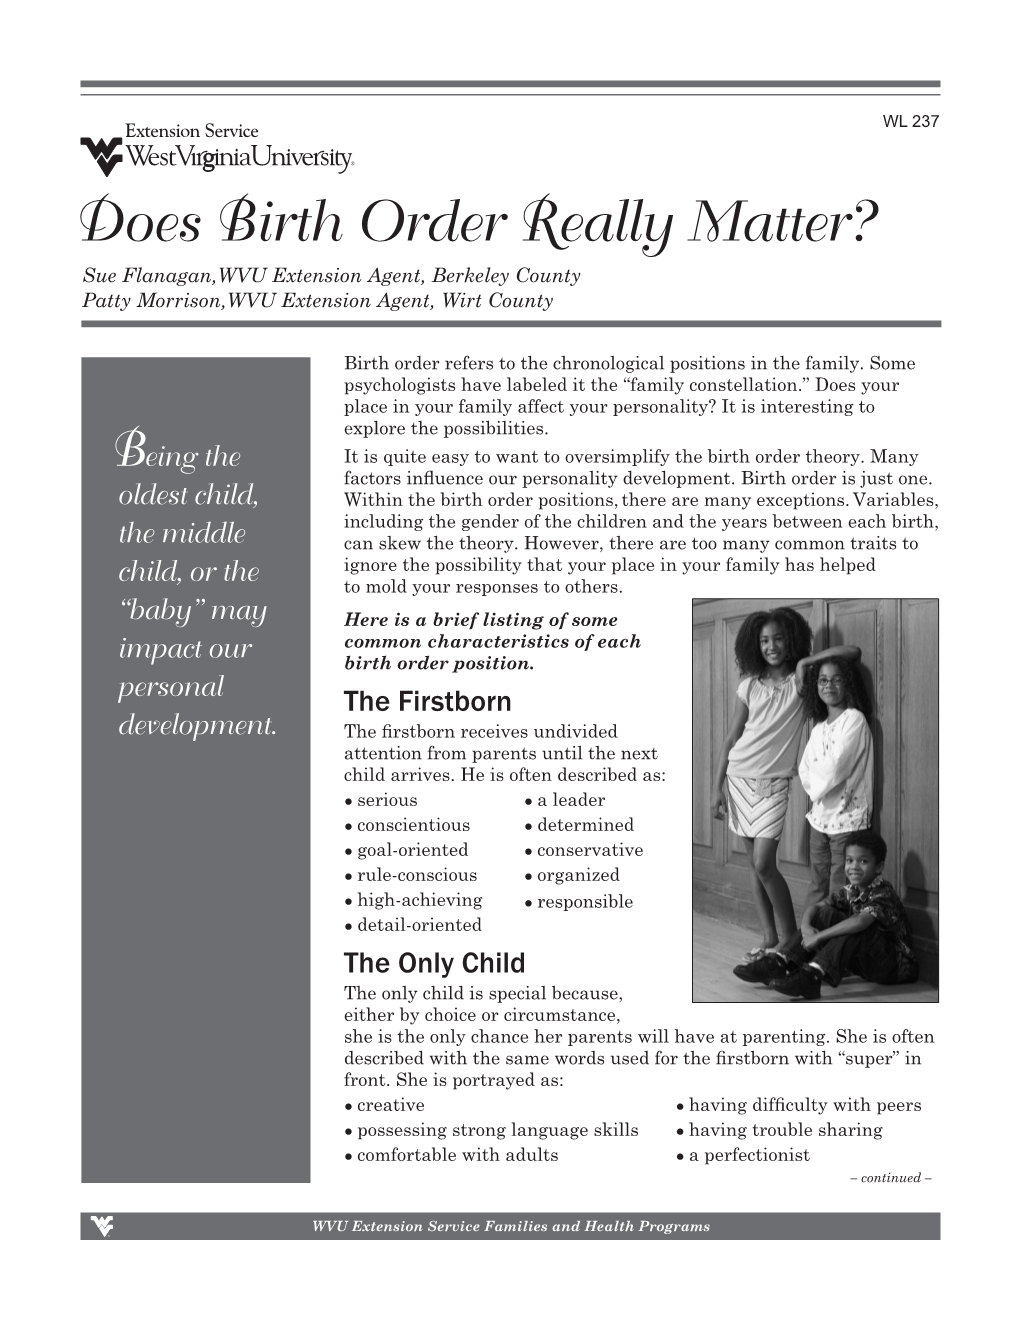 Does Birth Order Really Matter? Sue Flanagan,WVU Extension Agent, Berkeley County Patty Morrison,WVU Extension Agent, Wirt County